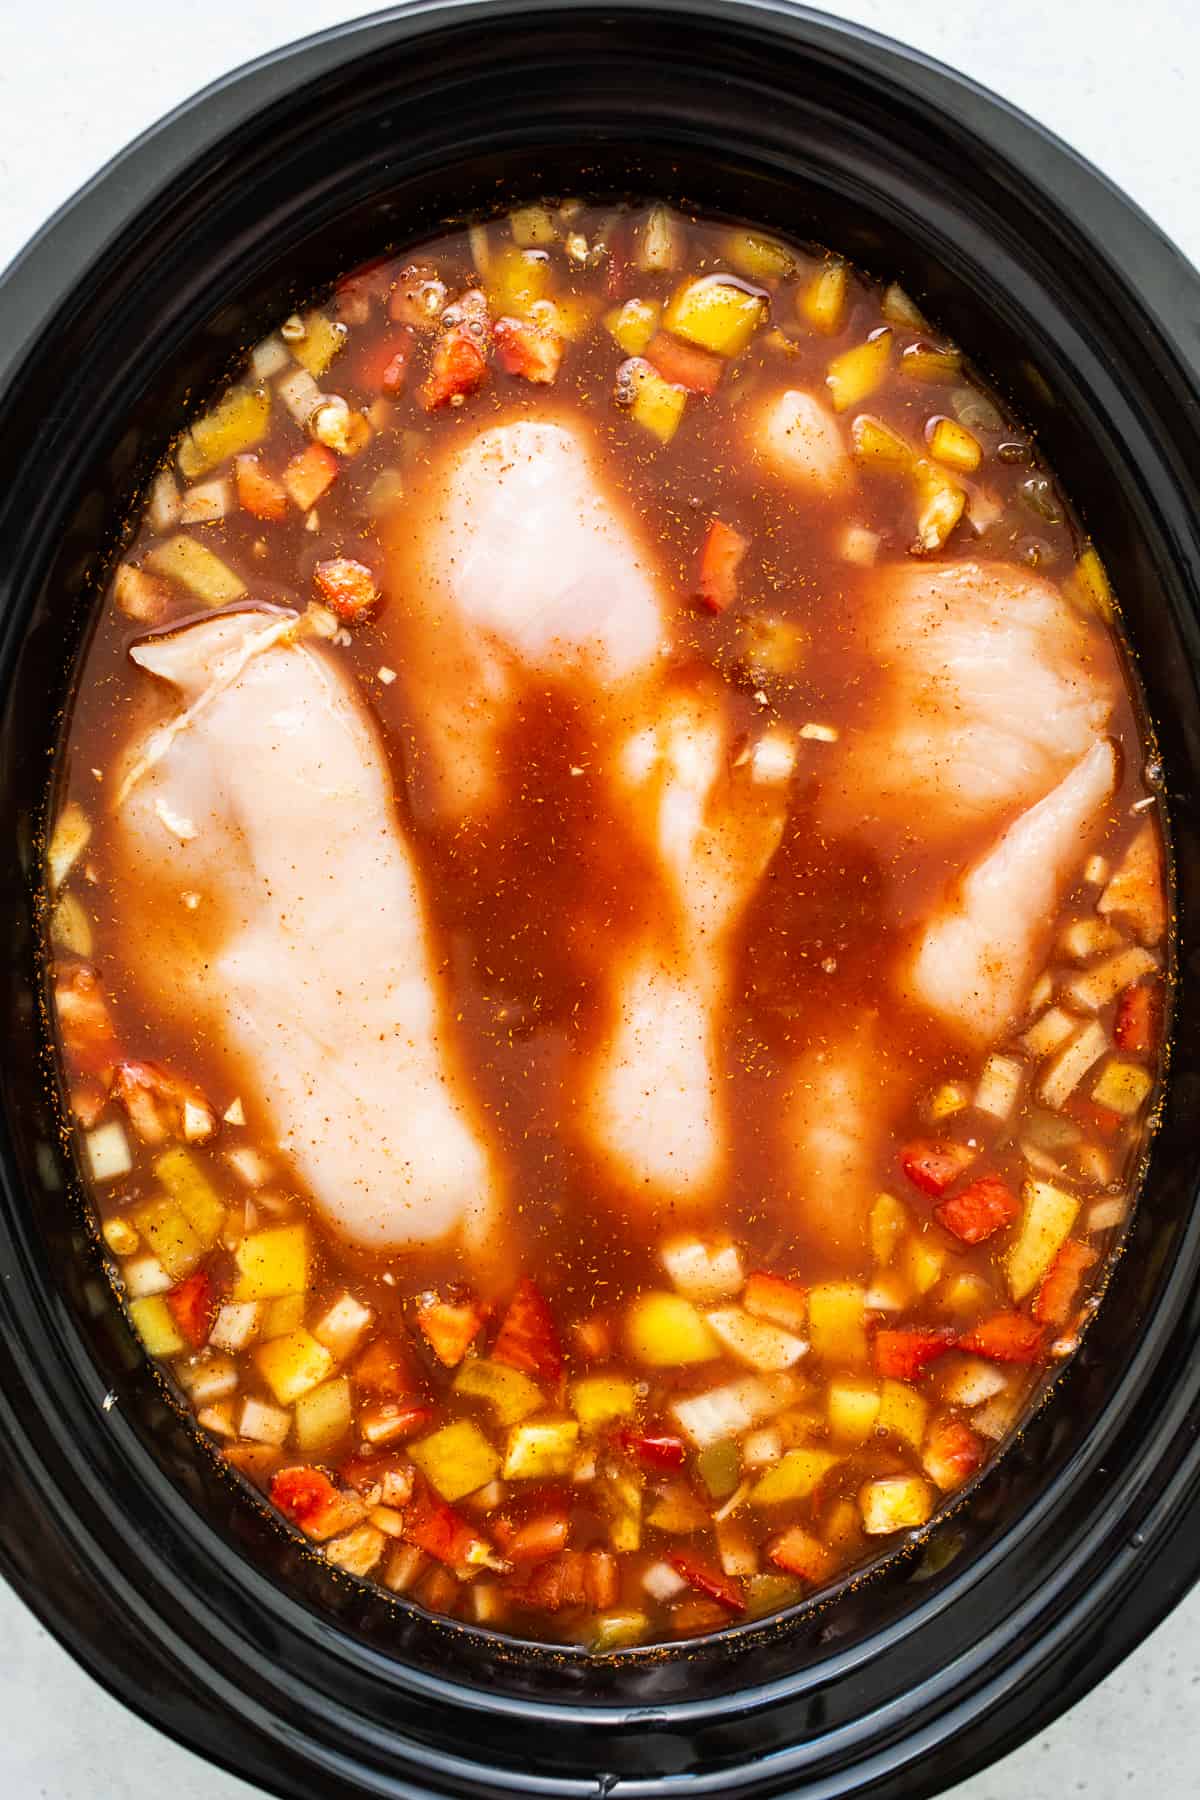 Chicken breasts submerged in soup.